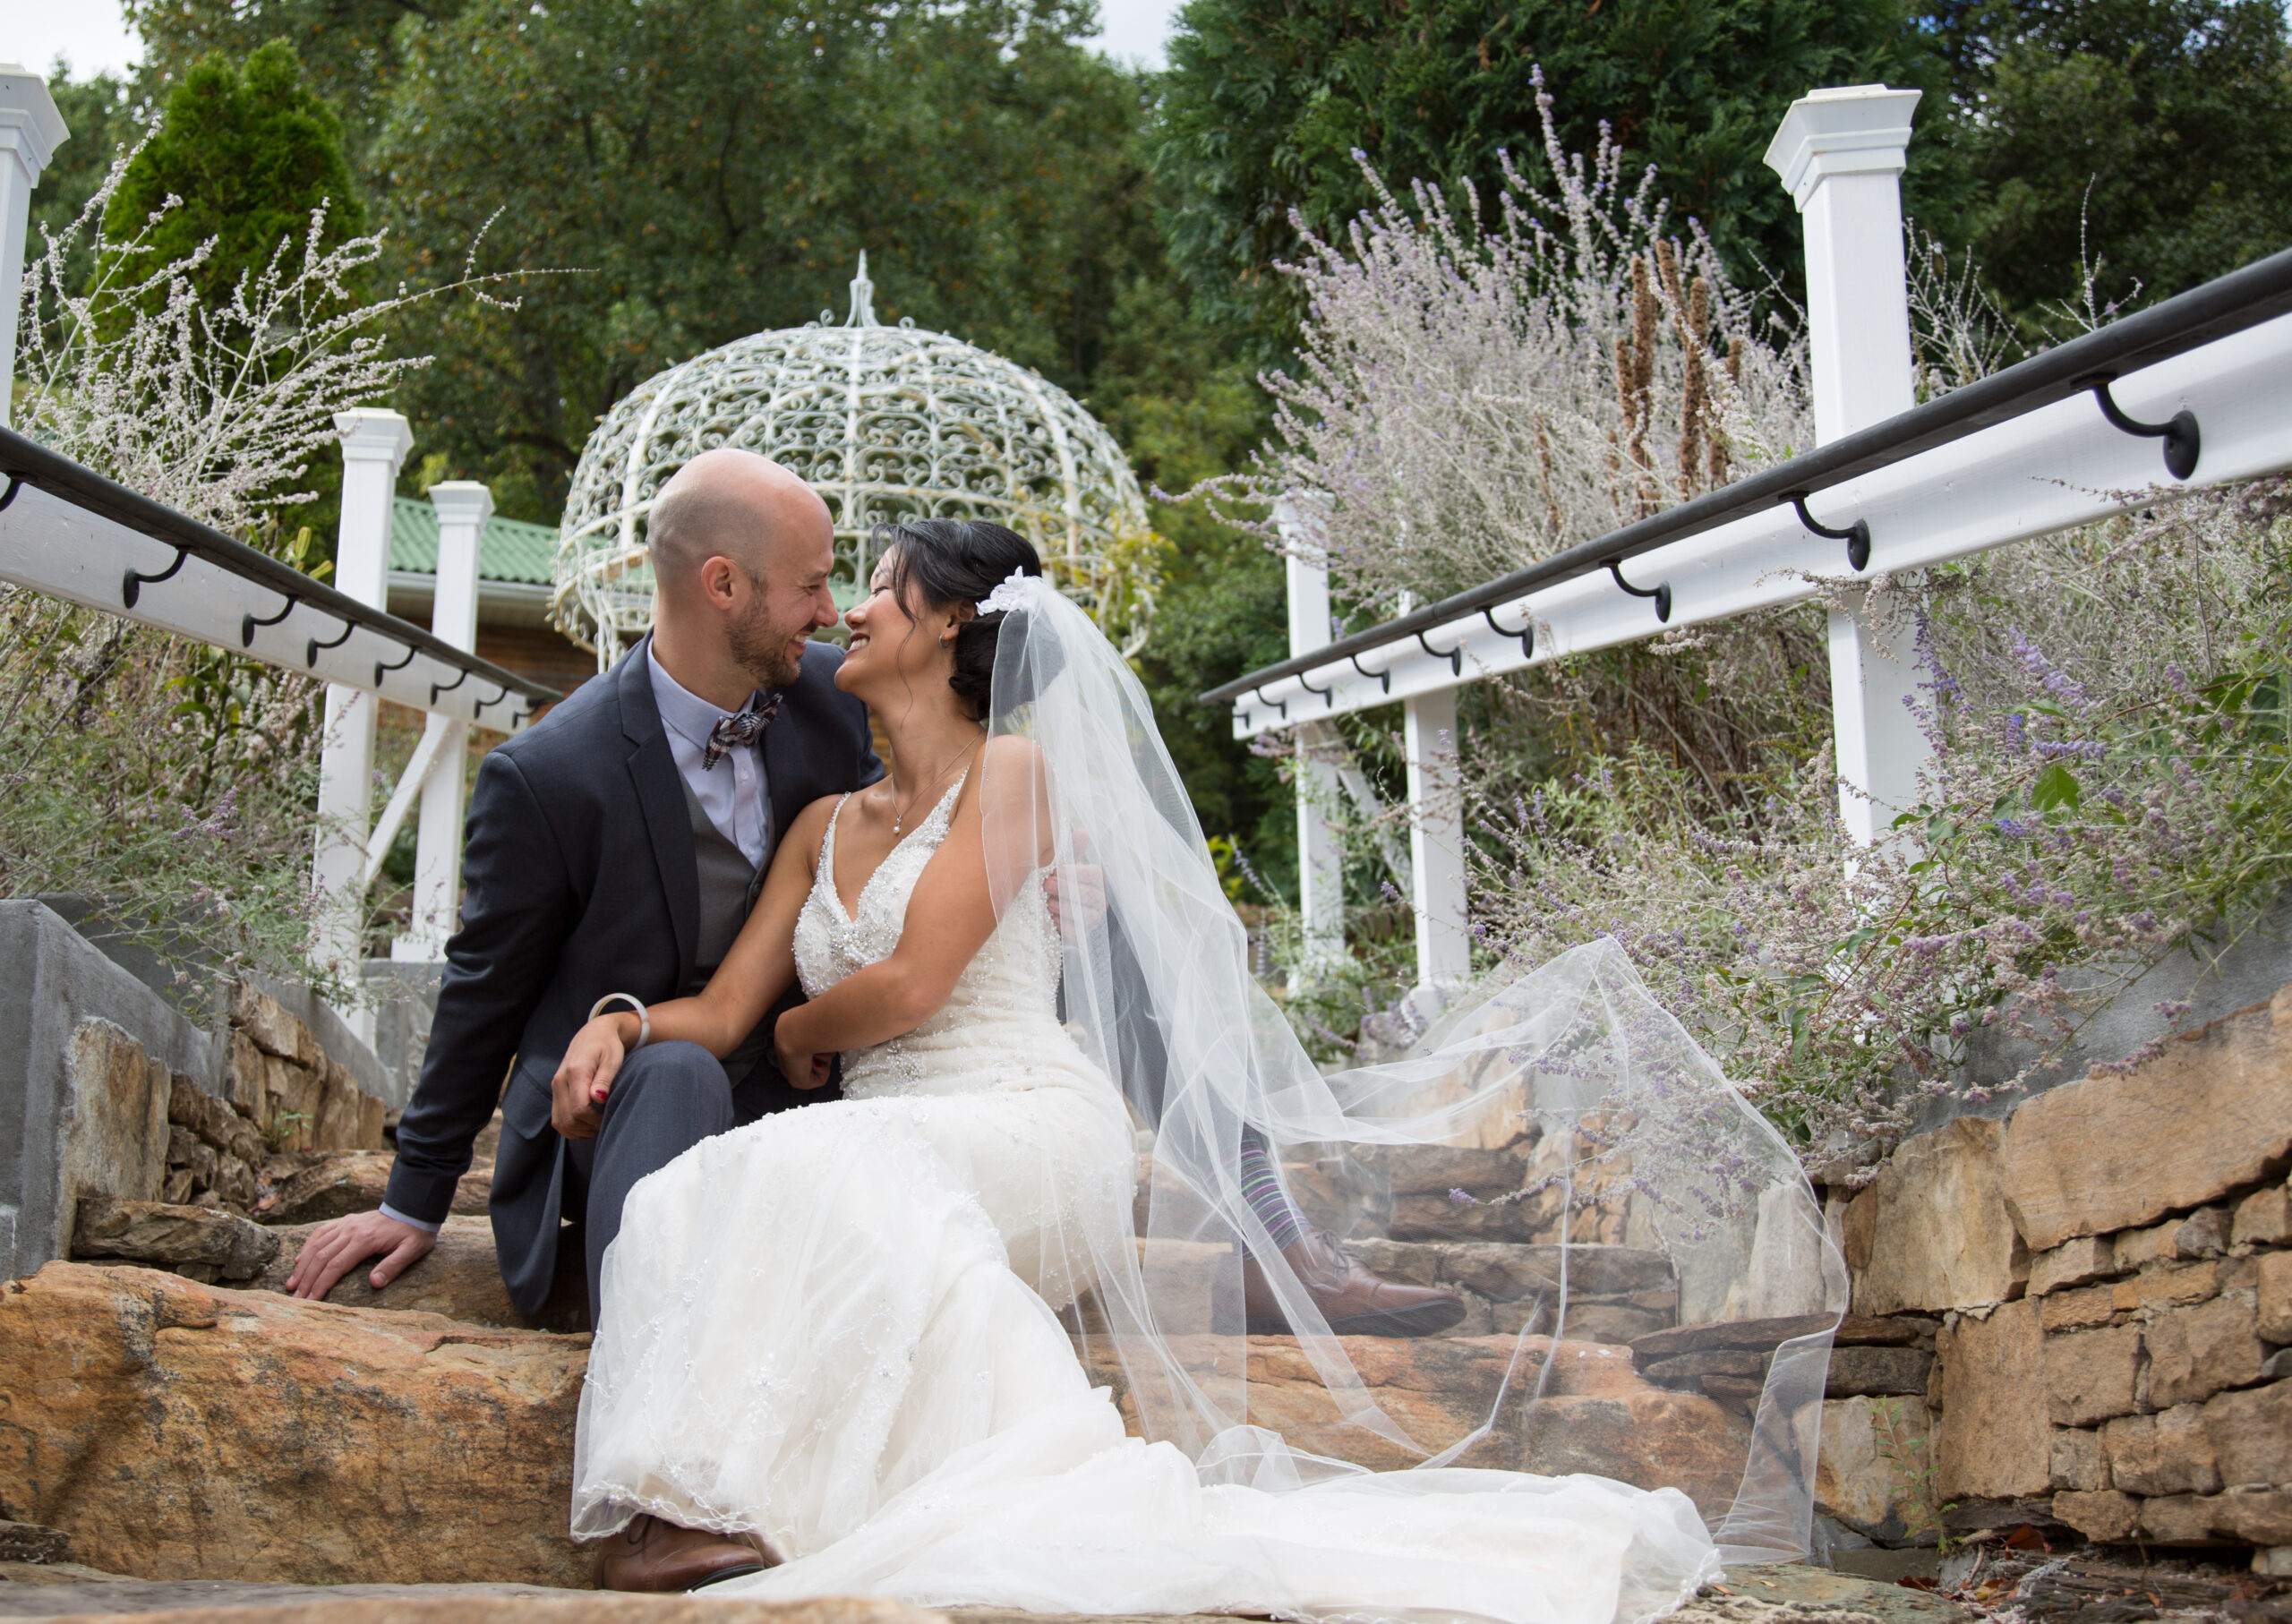 A bride and groom sitting on steps in front of a gazebo